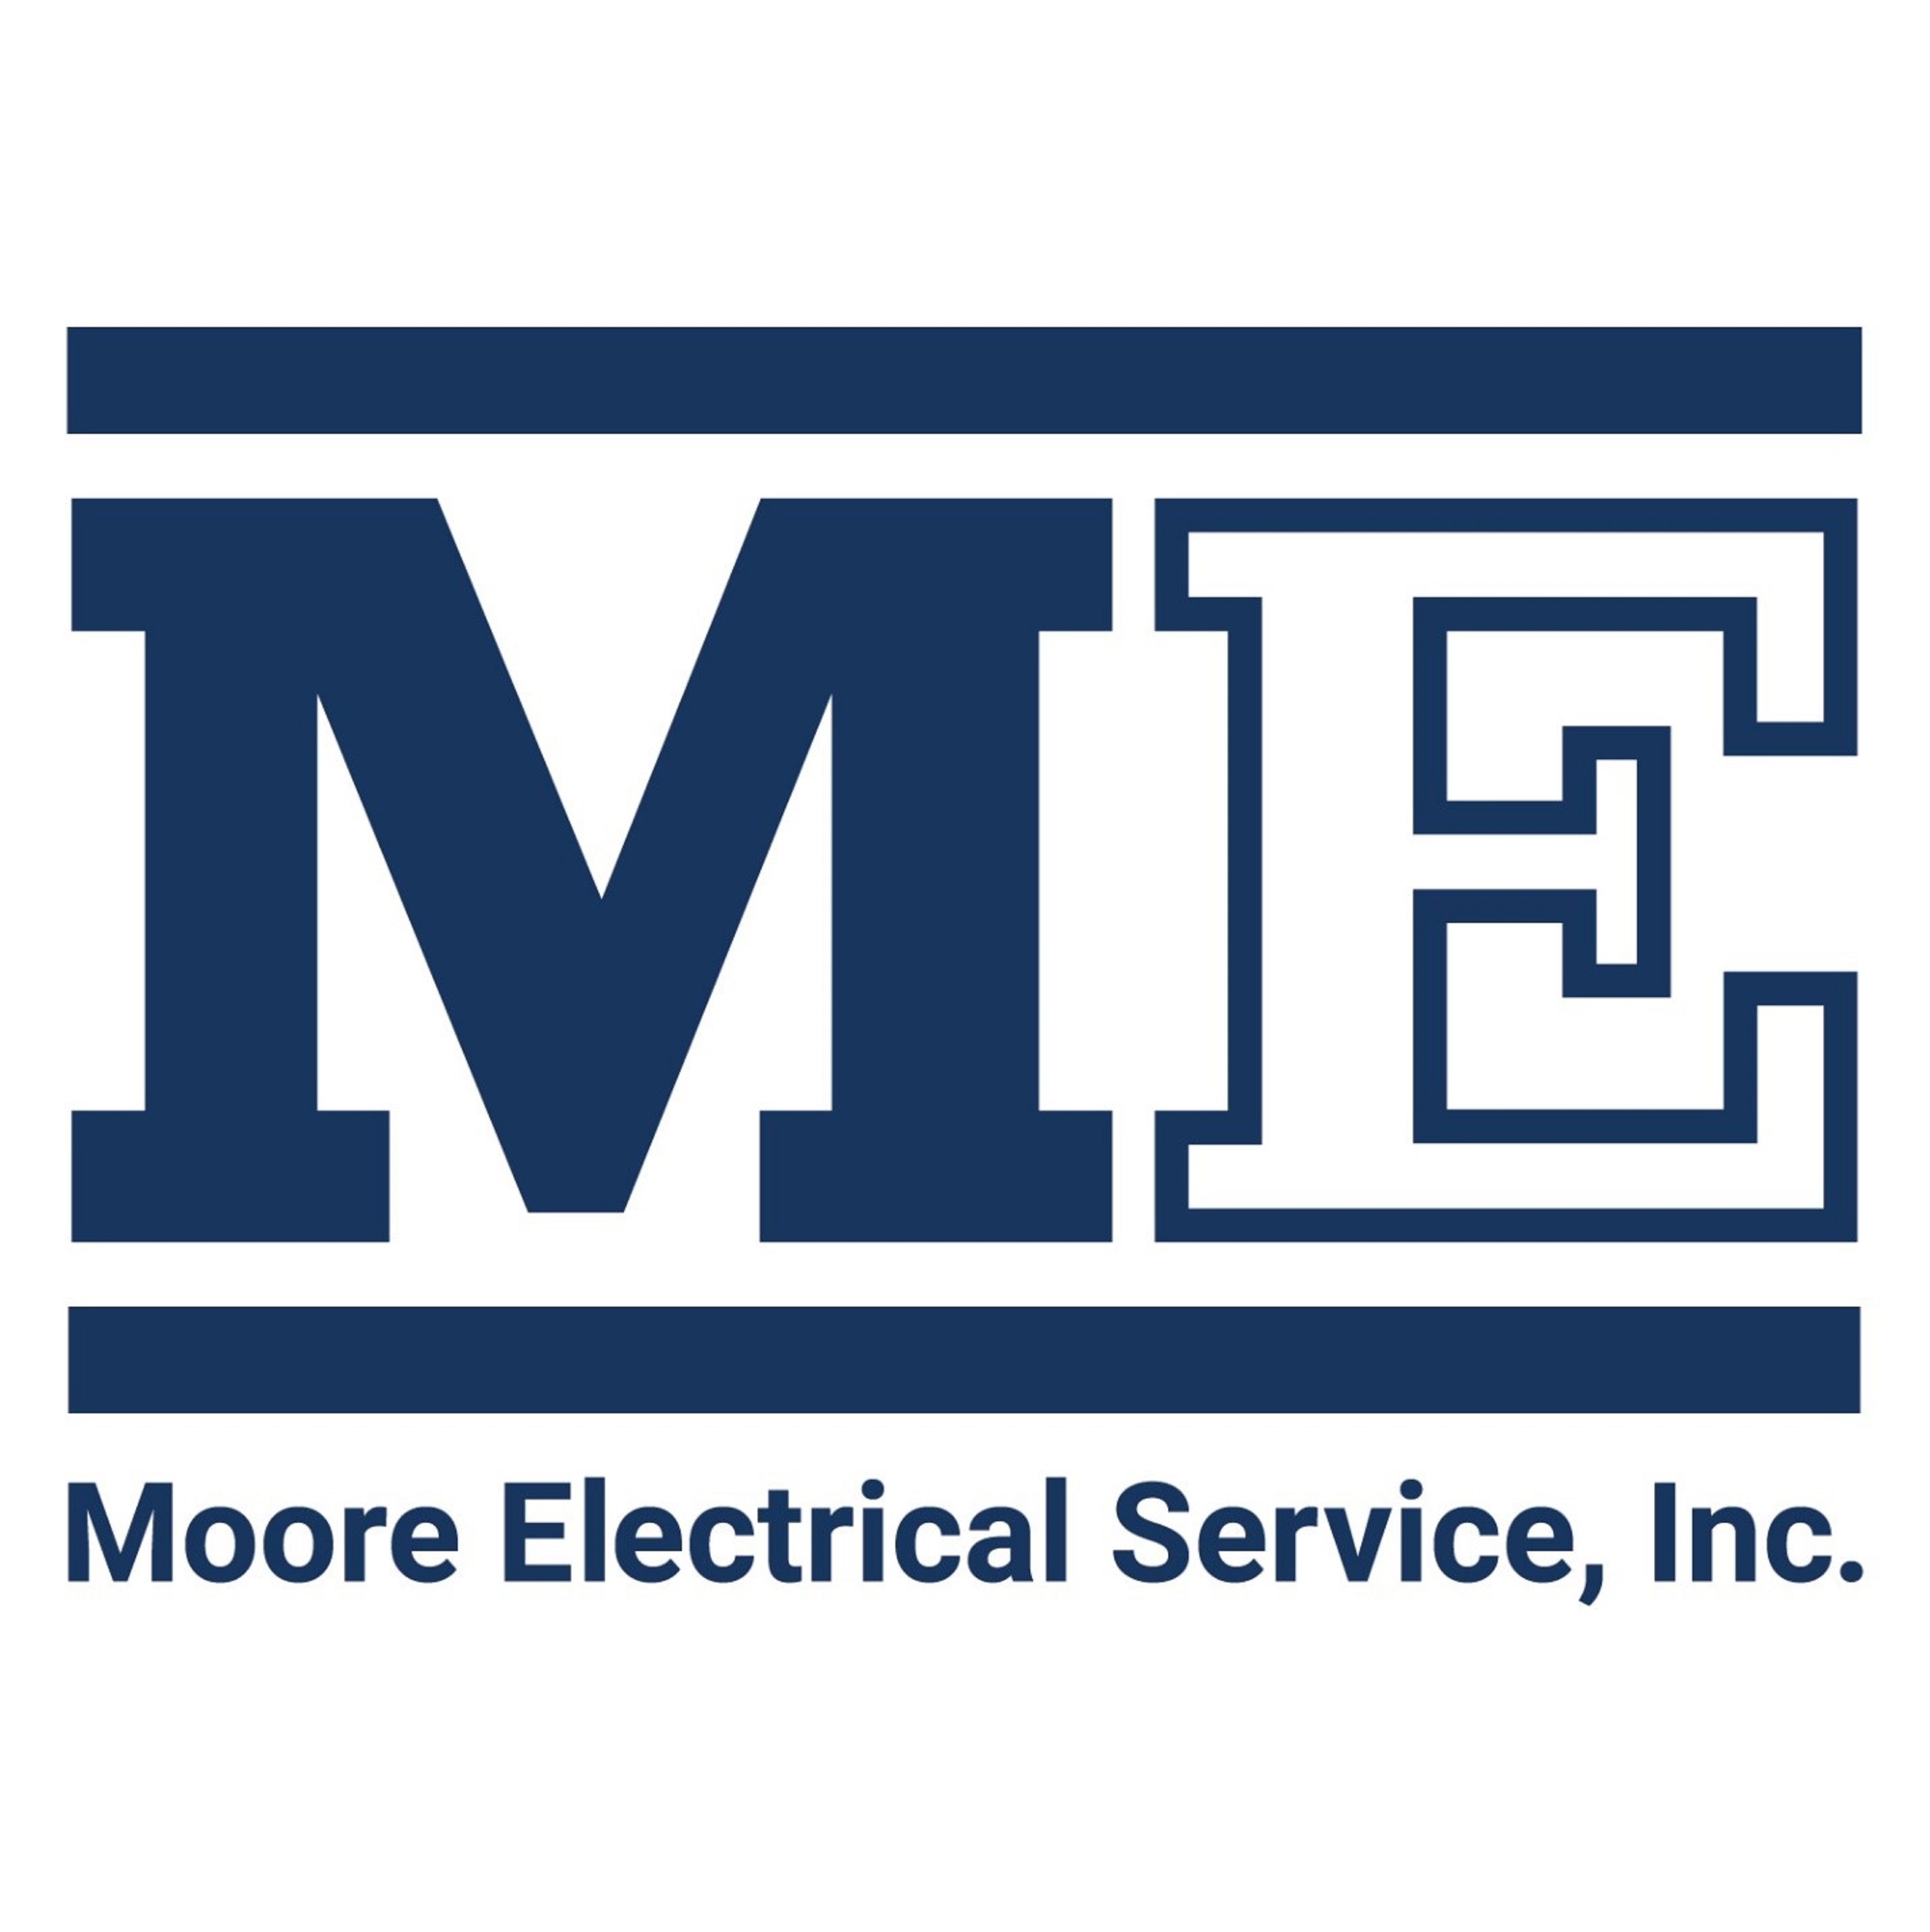 Moore Electrical